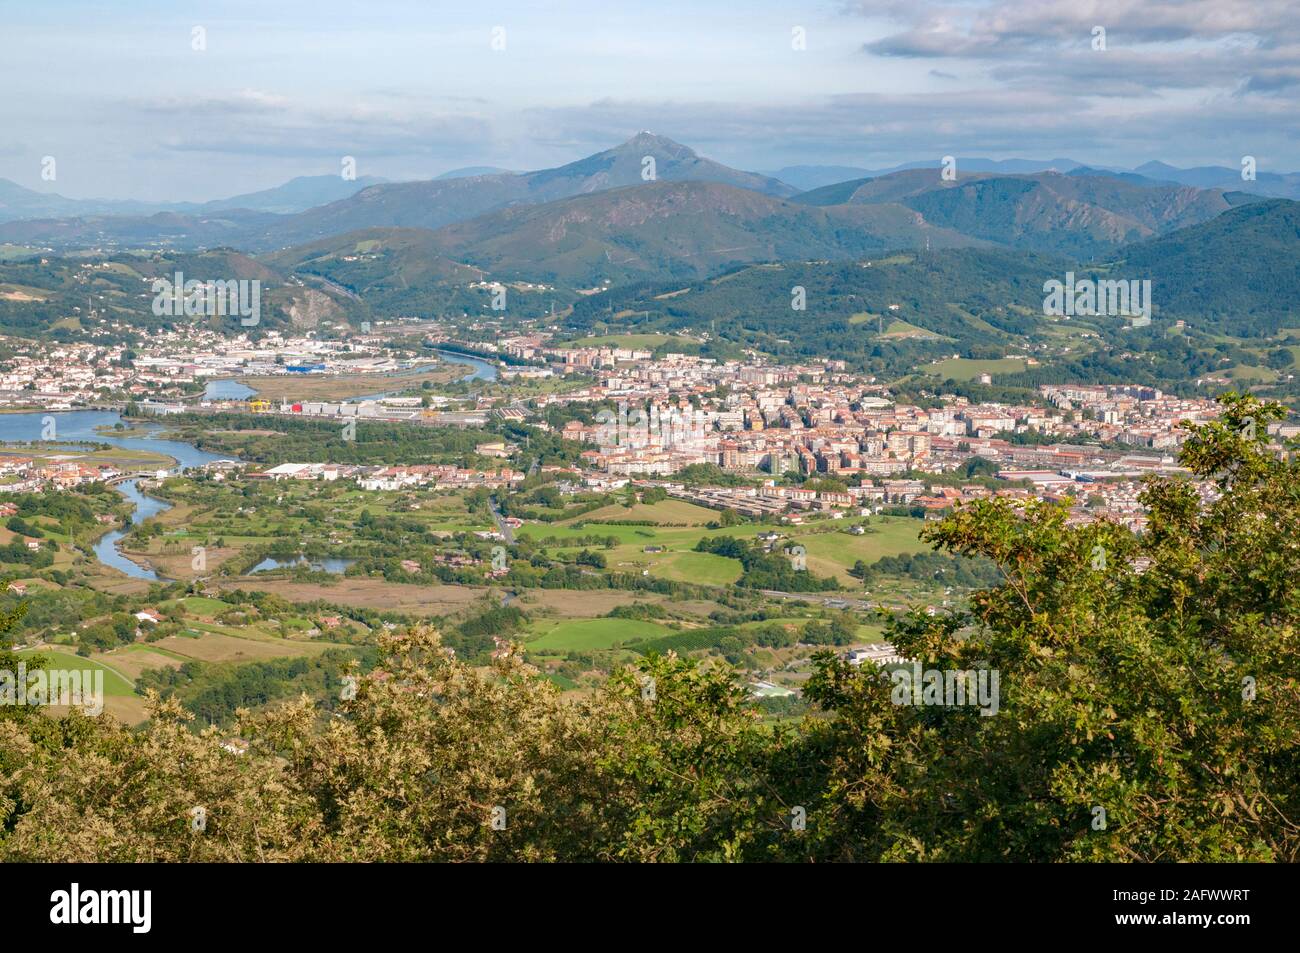 Views across Spain and France with Irun and Hendaye towns, hills and La Rhune mountain (France) from the viewpoint of Santa Barbara Dorrea, Spain Stock Photo